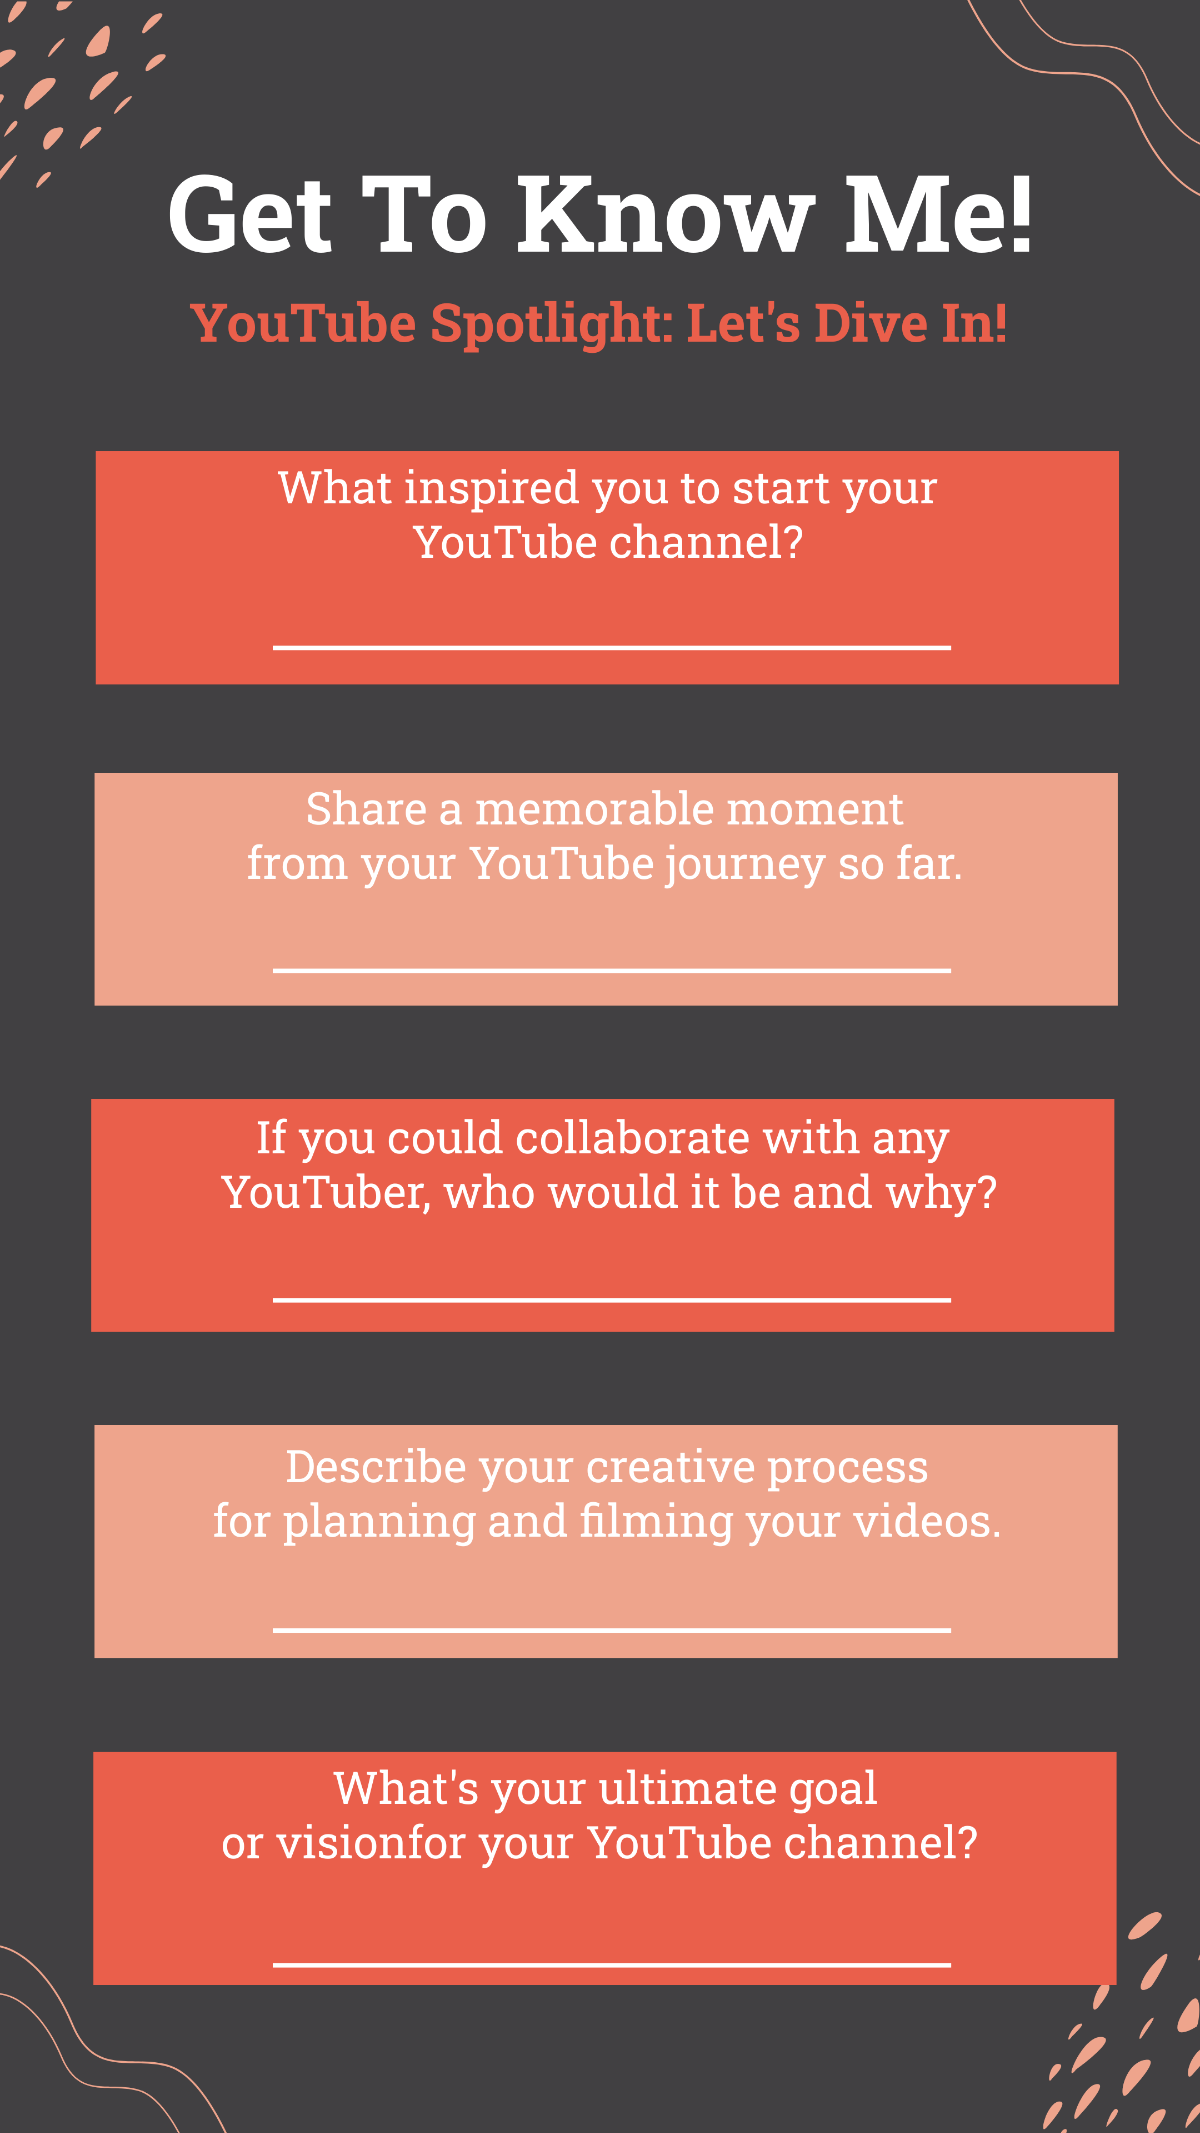 Get to Know Me Questions for Youtube